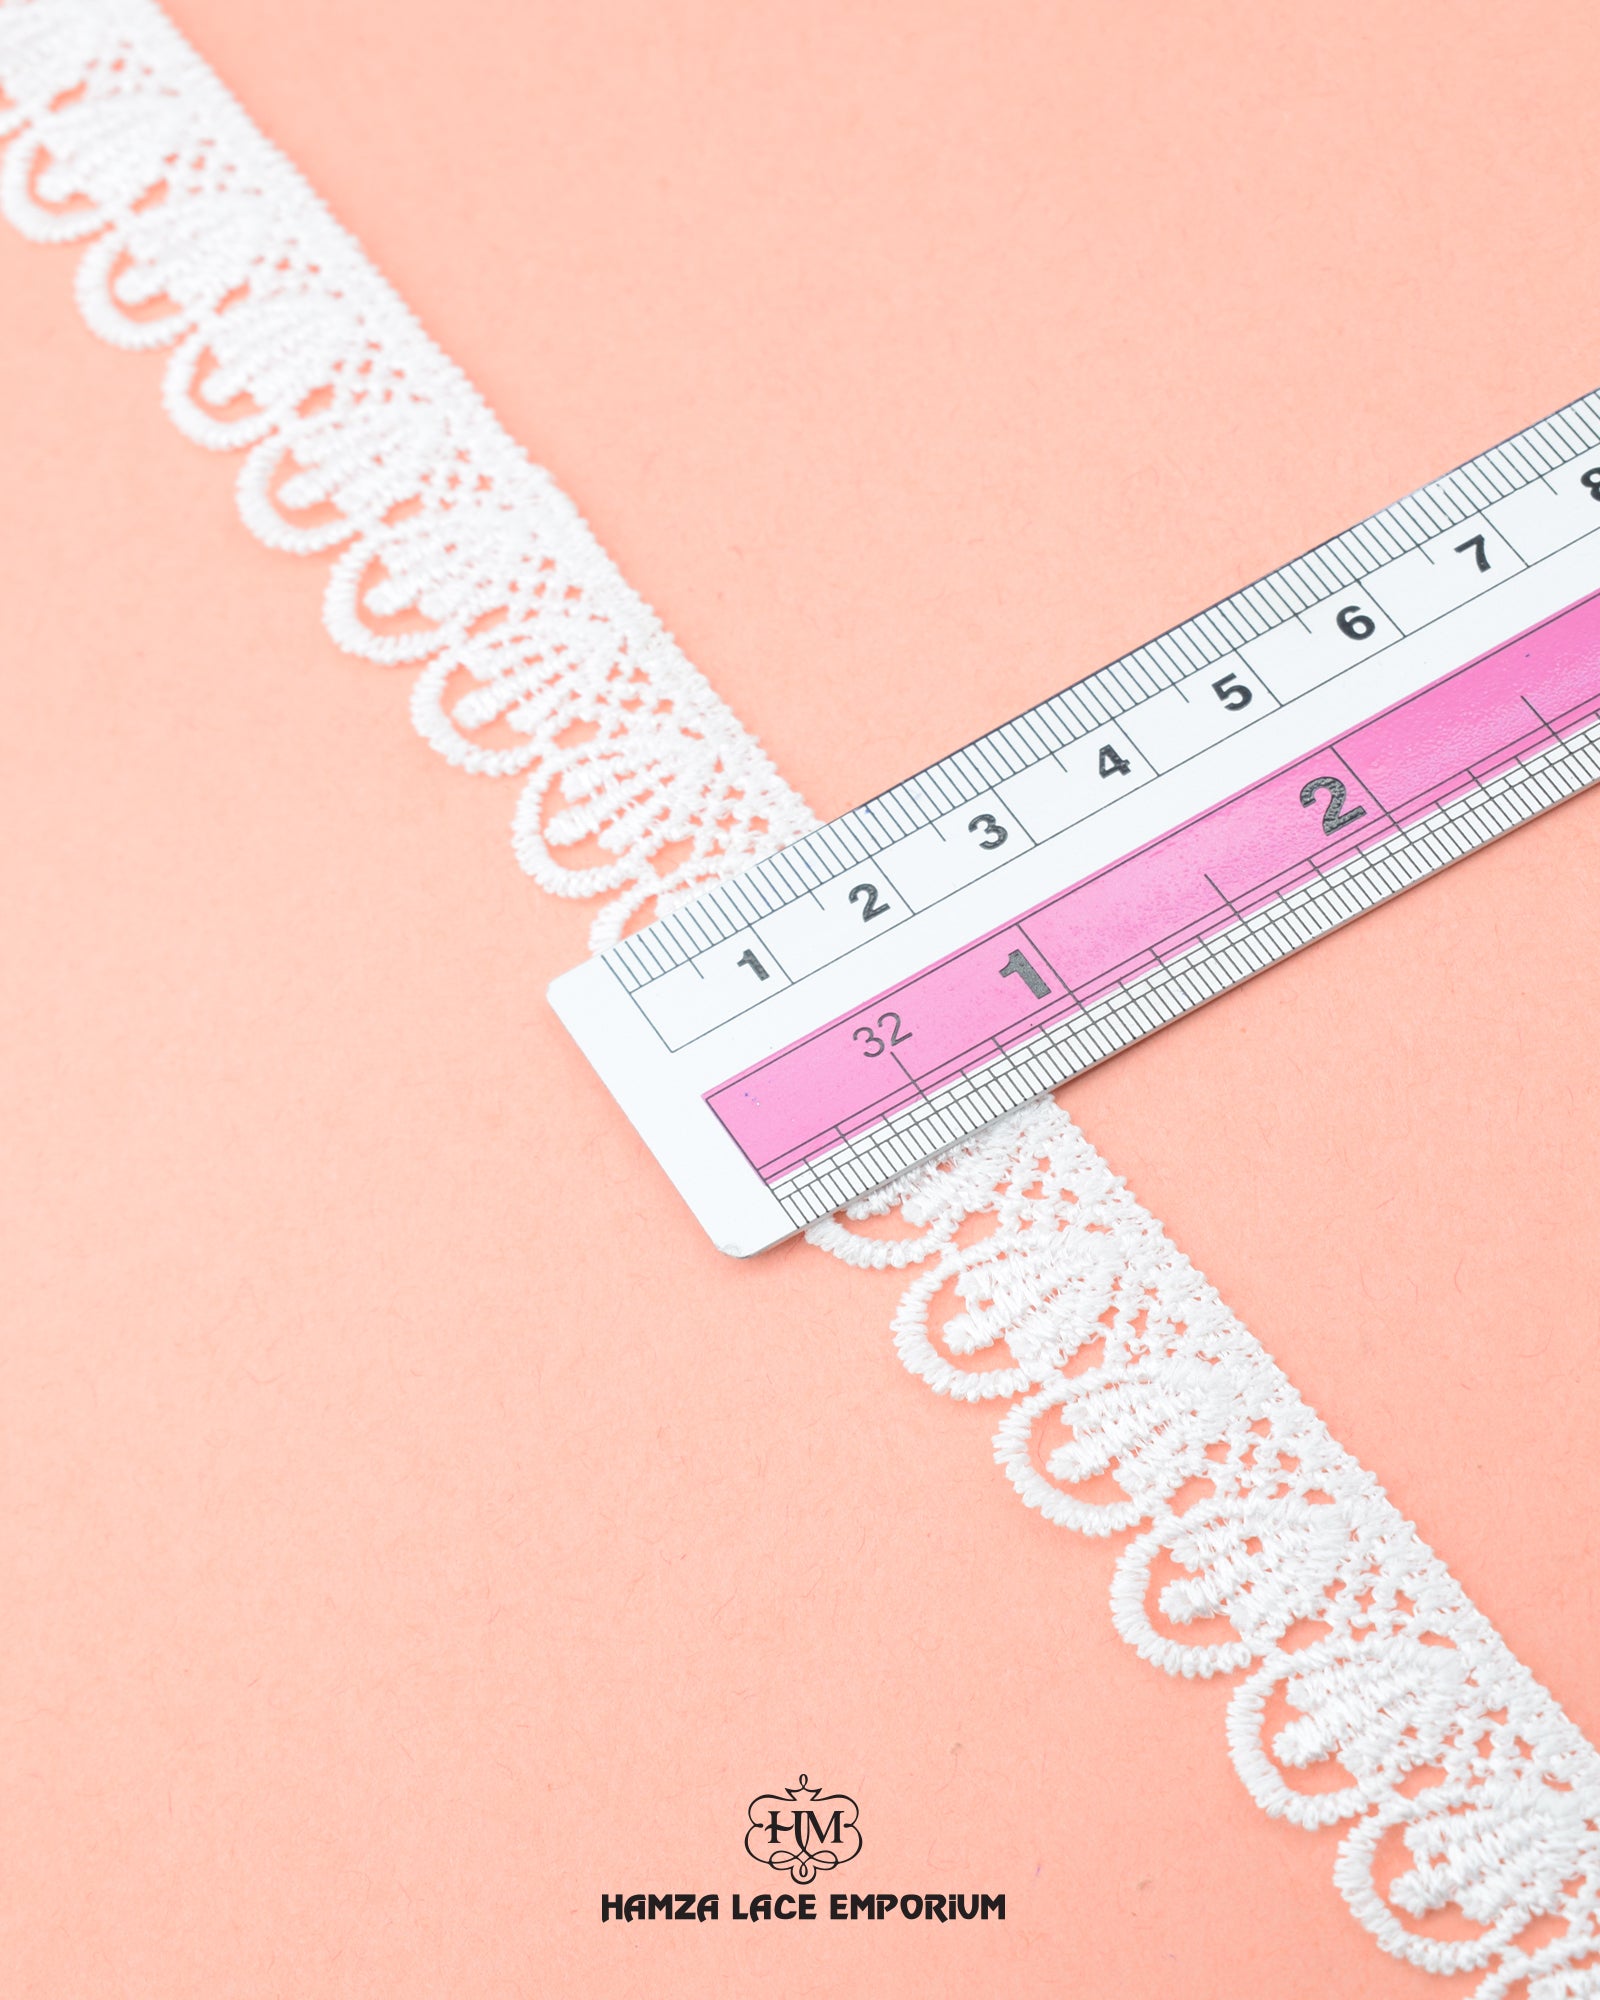 Size of the 'Edging Loop Lace 23136' is shown as '0.5' inches with the help of a ruler